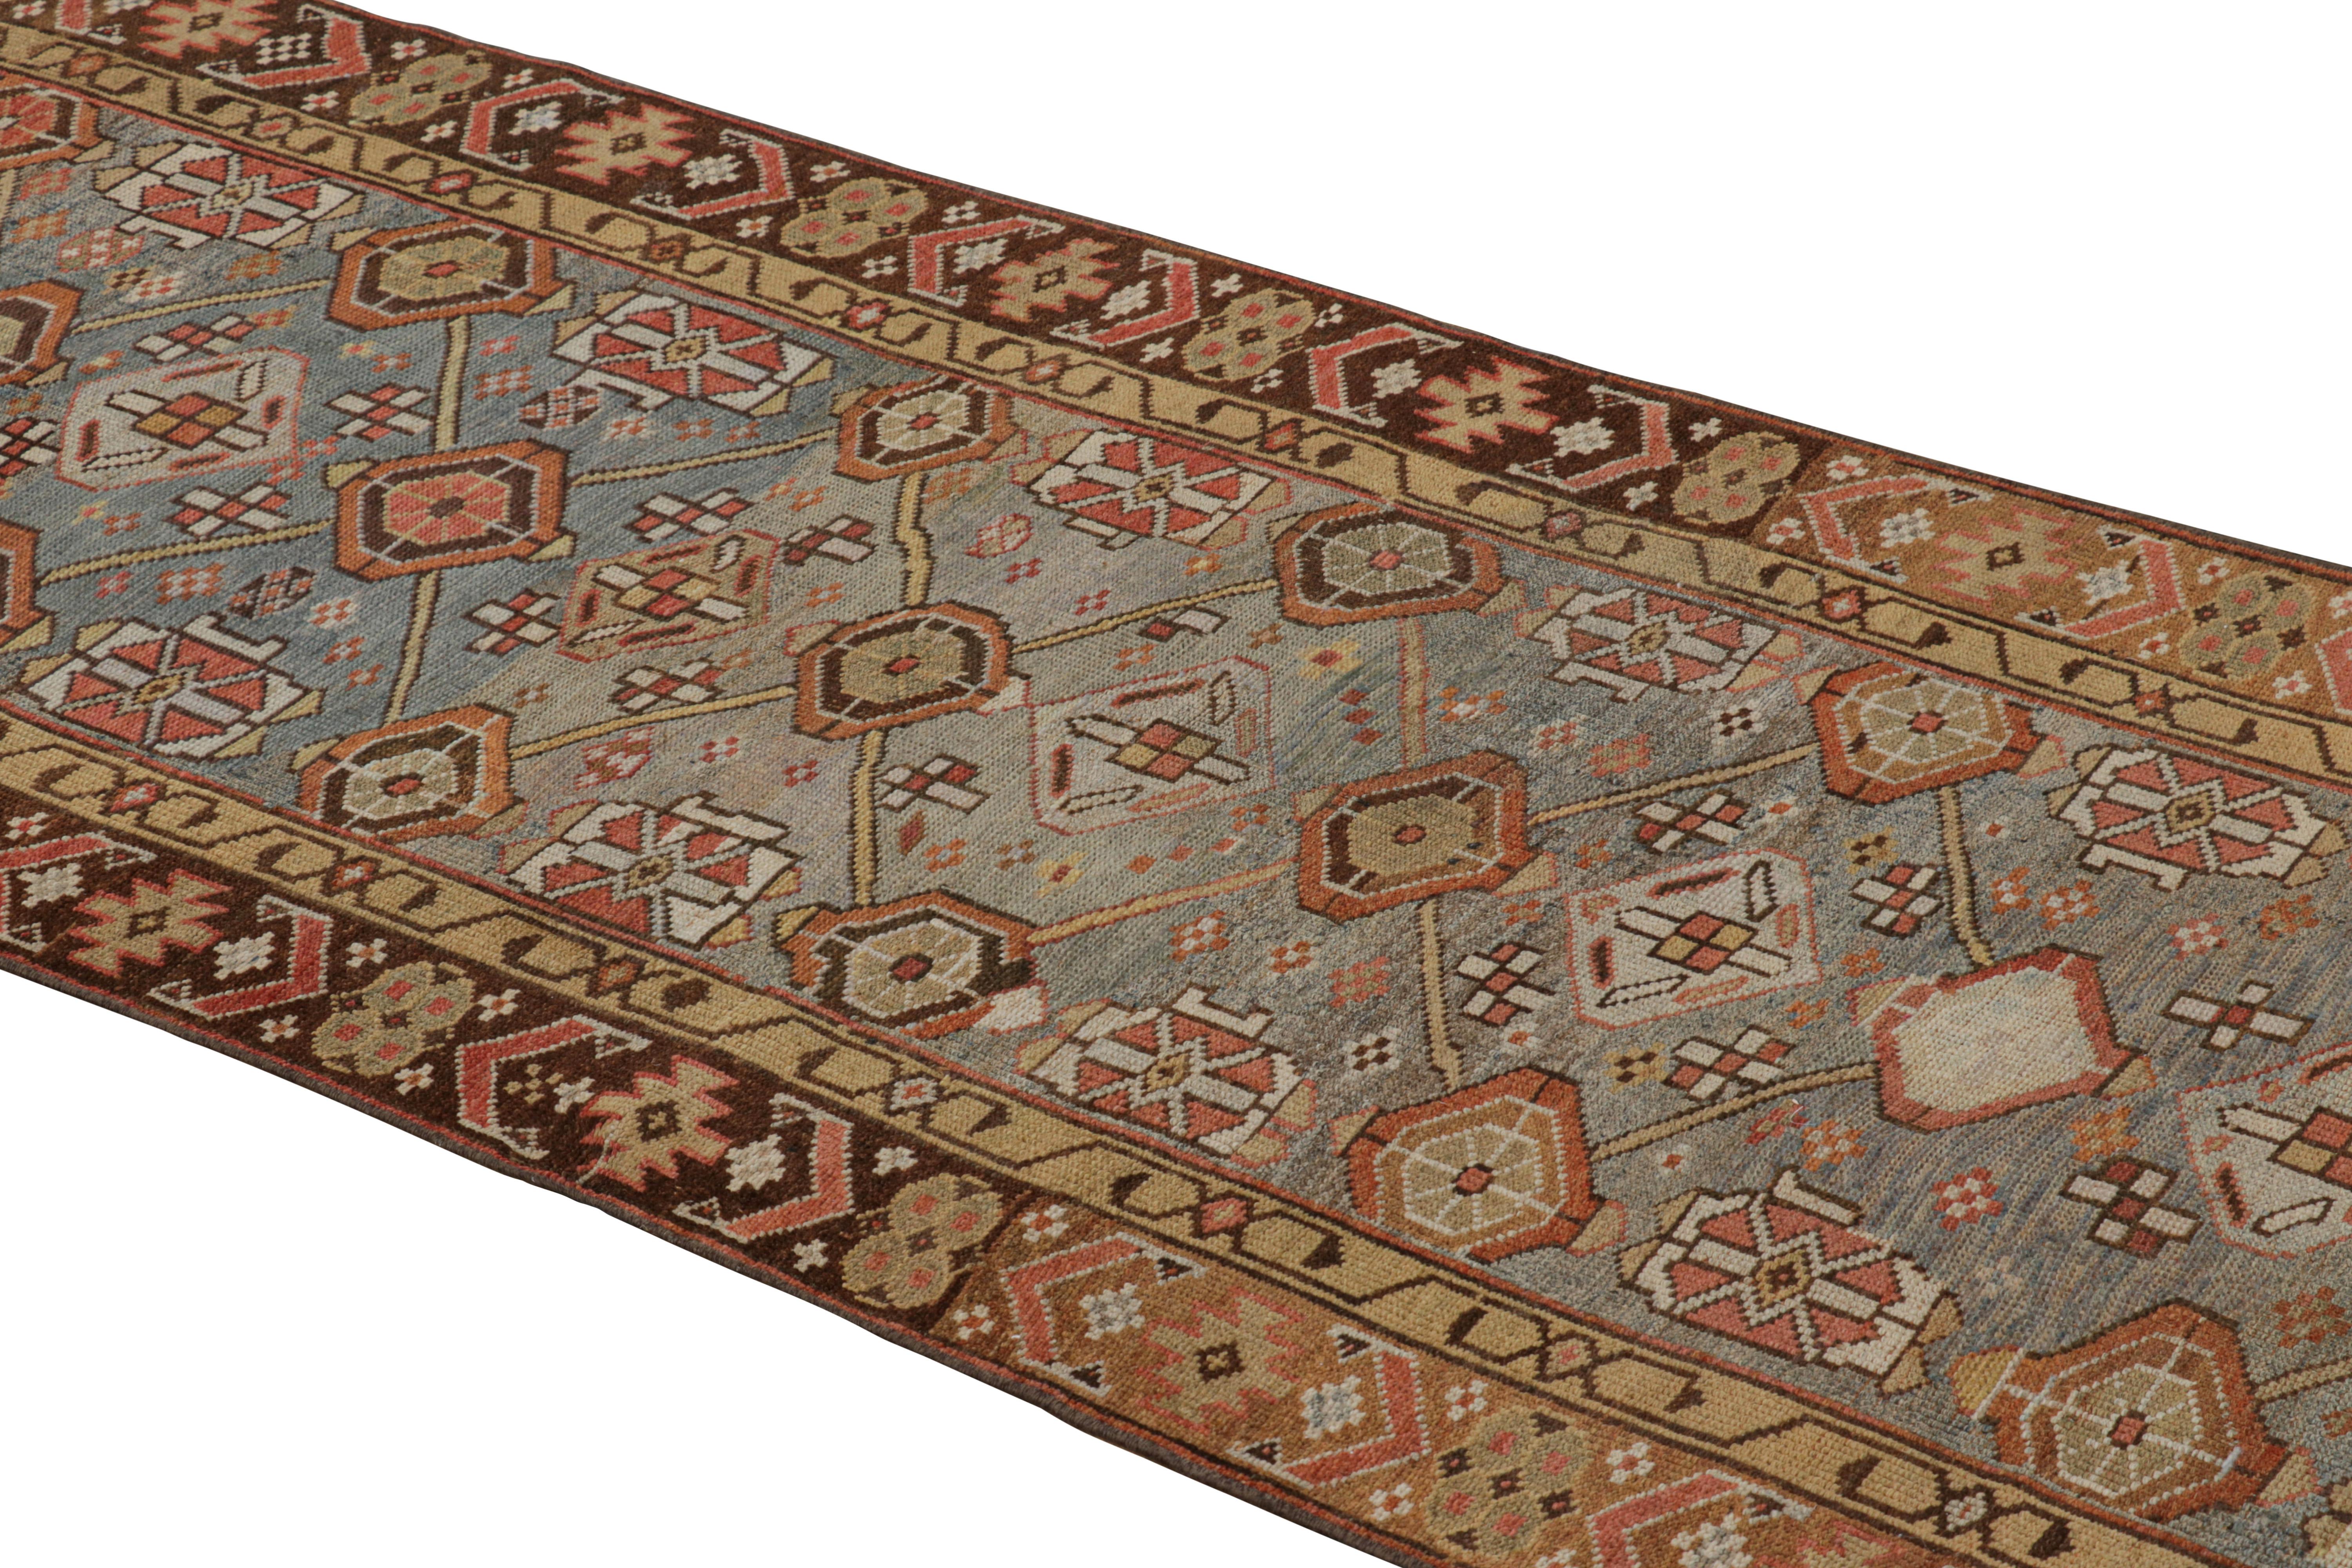 Hand-knotted in wool circa 1950-1960, this 3x13 vintage Turkish Heriz runner rug design is a latest addition to the Rug & Kilim collection.

On the Design: 

From a new curation of exciting pieces, all overdyed and with an antique wash that gives